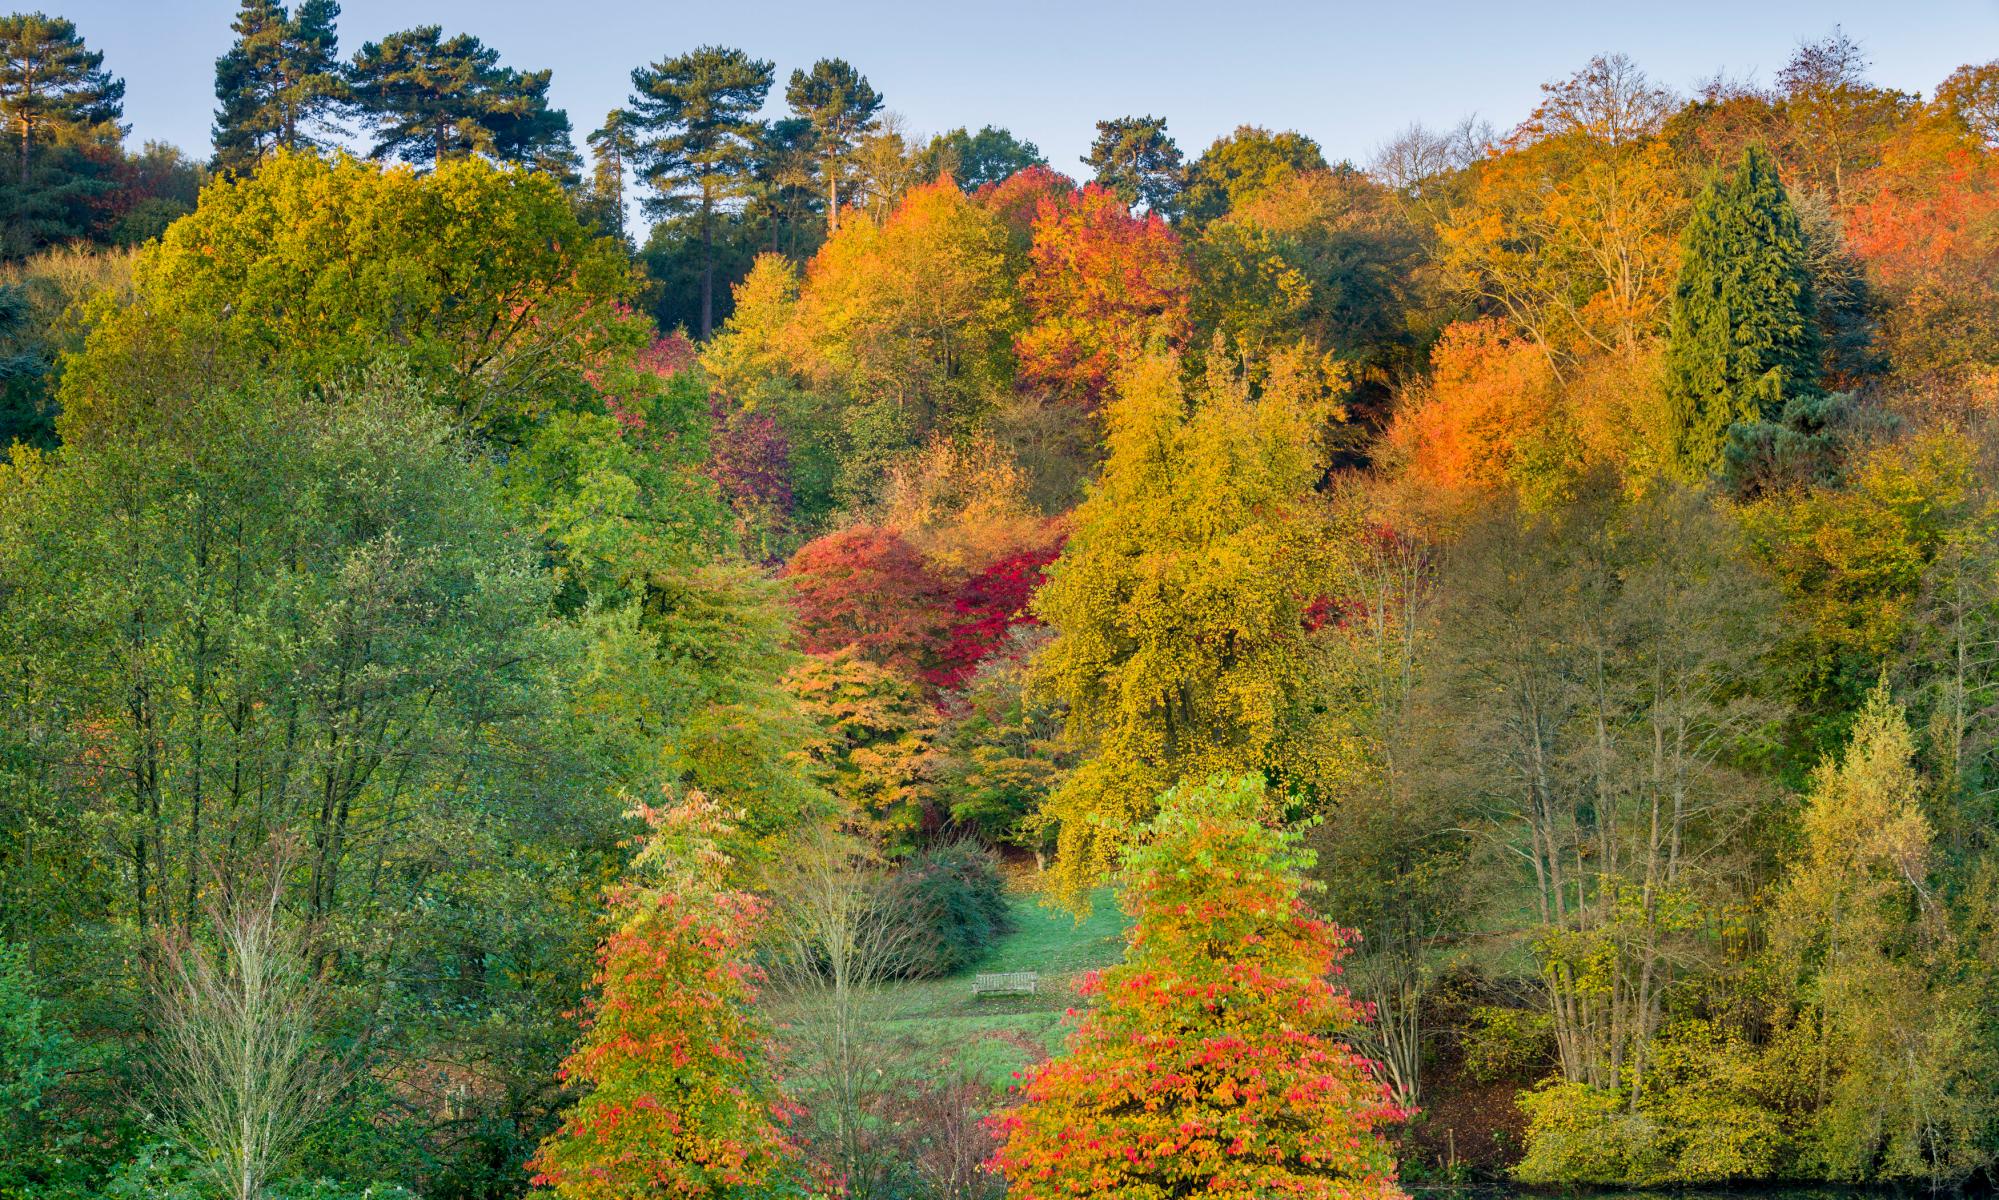 ‘Unique’ autumn show predicted for UK trees – but decline may follow